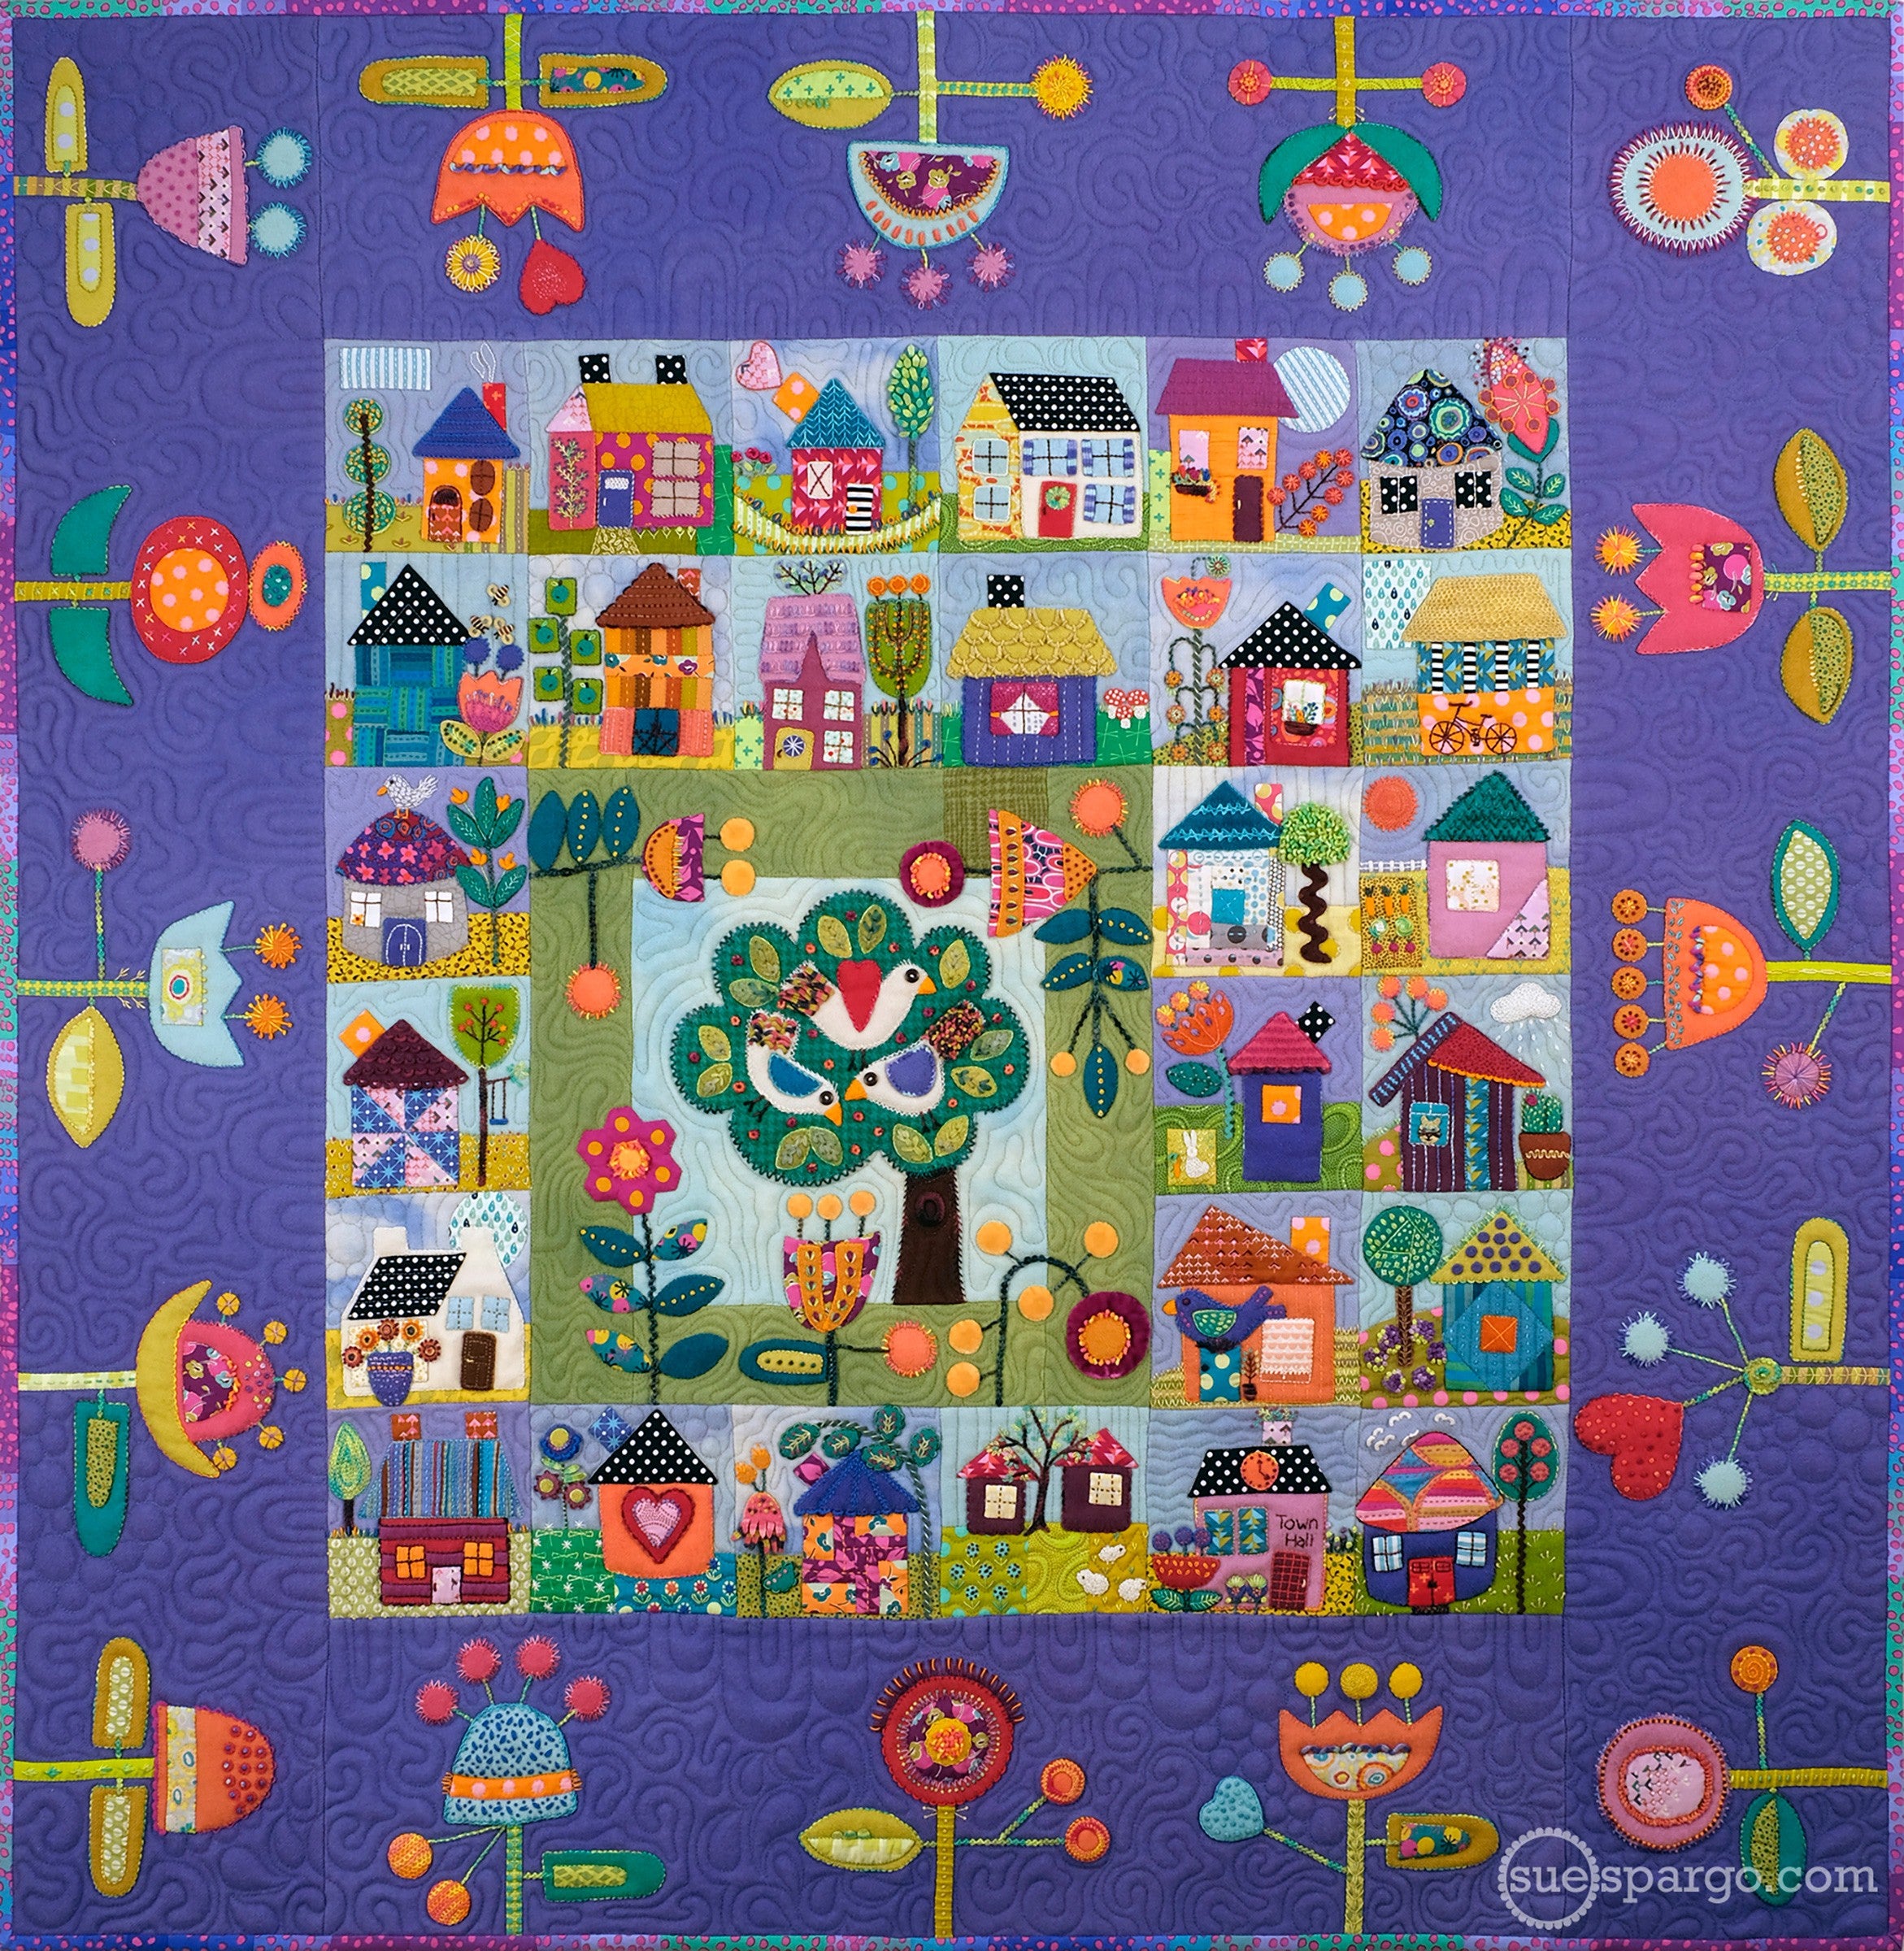 Homegrown - Applique, Embroidery, and Quilt Pattern Book by Sue Spargo of Folk Art Quilts